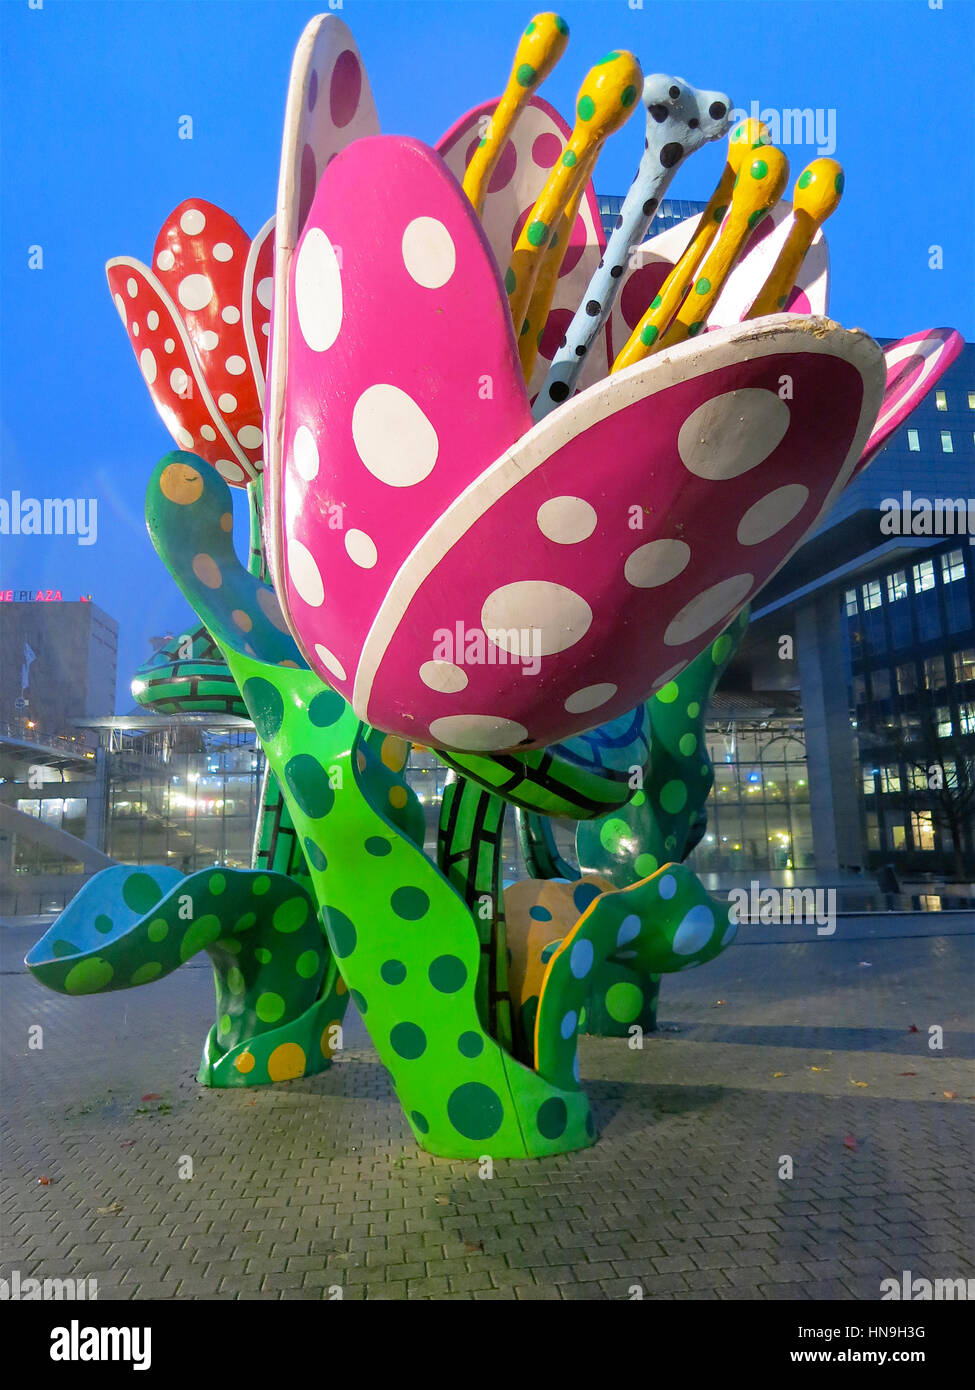 Tulips sculpture by Yayoi Kusama in Lille, France. Stock Photo